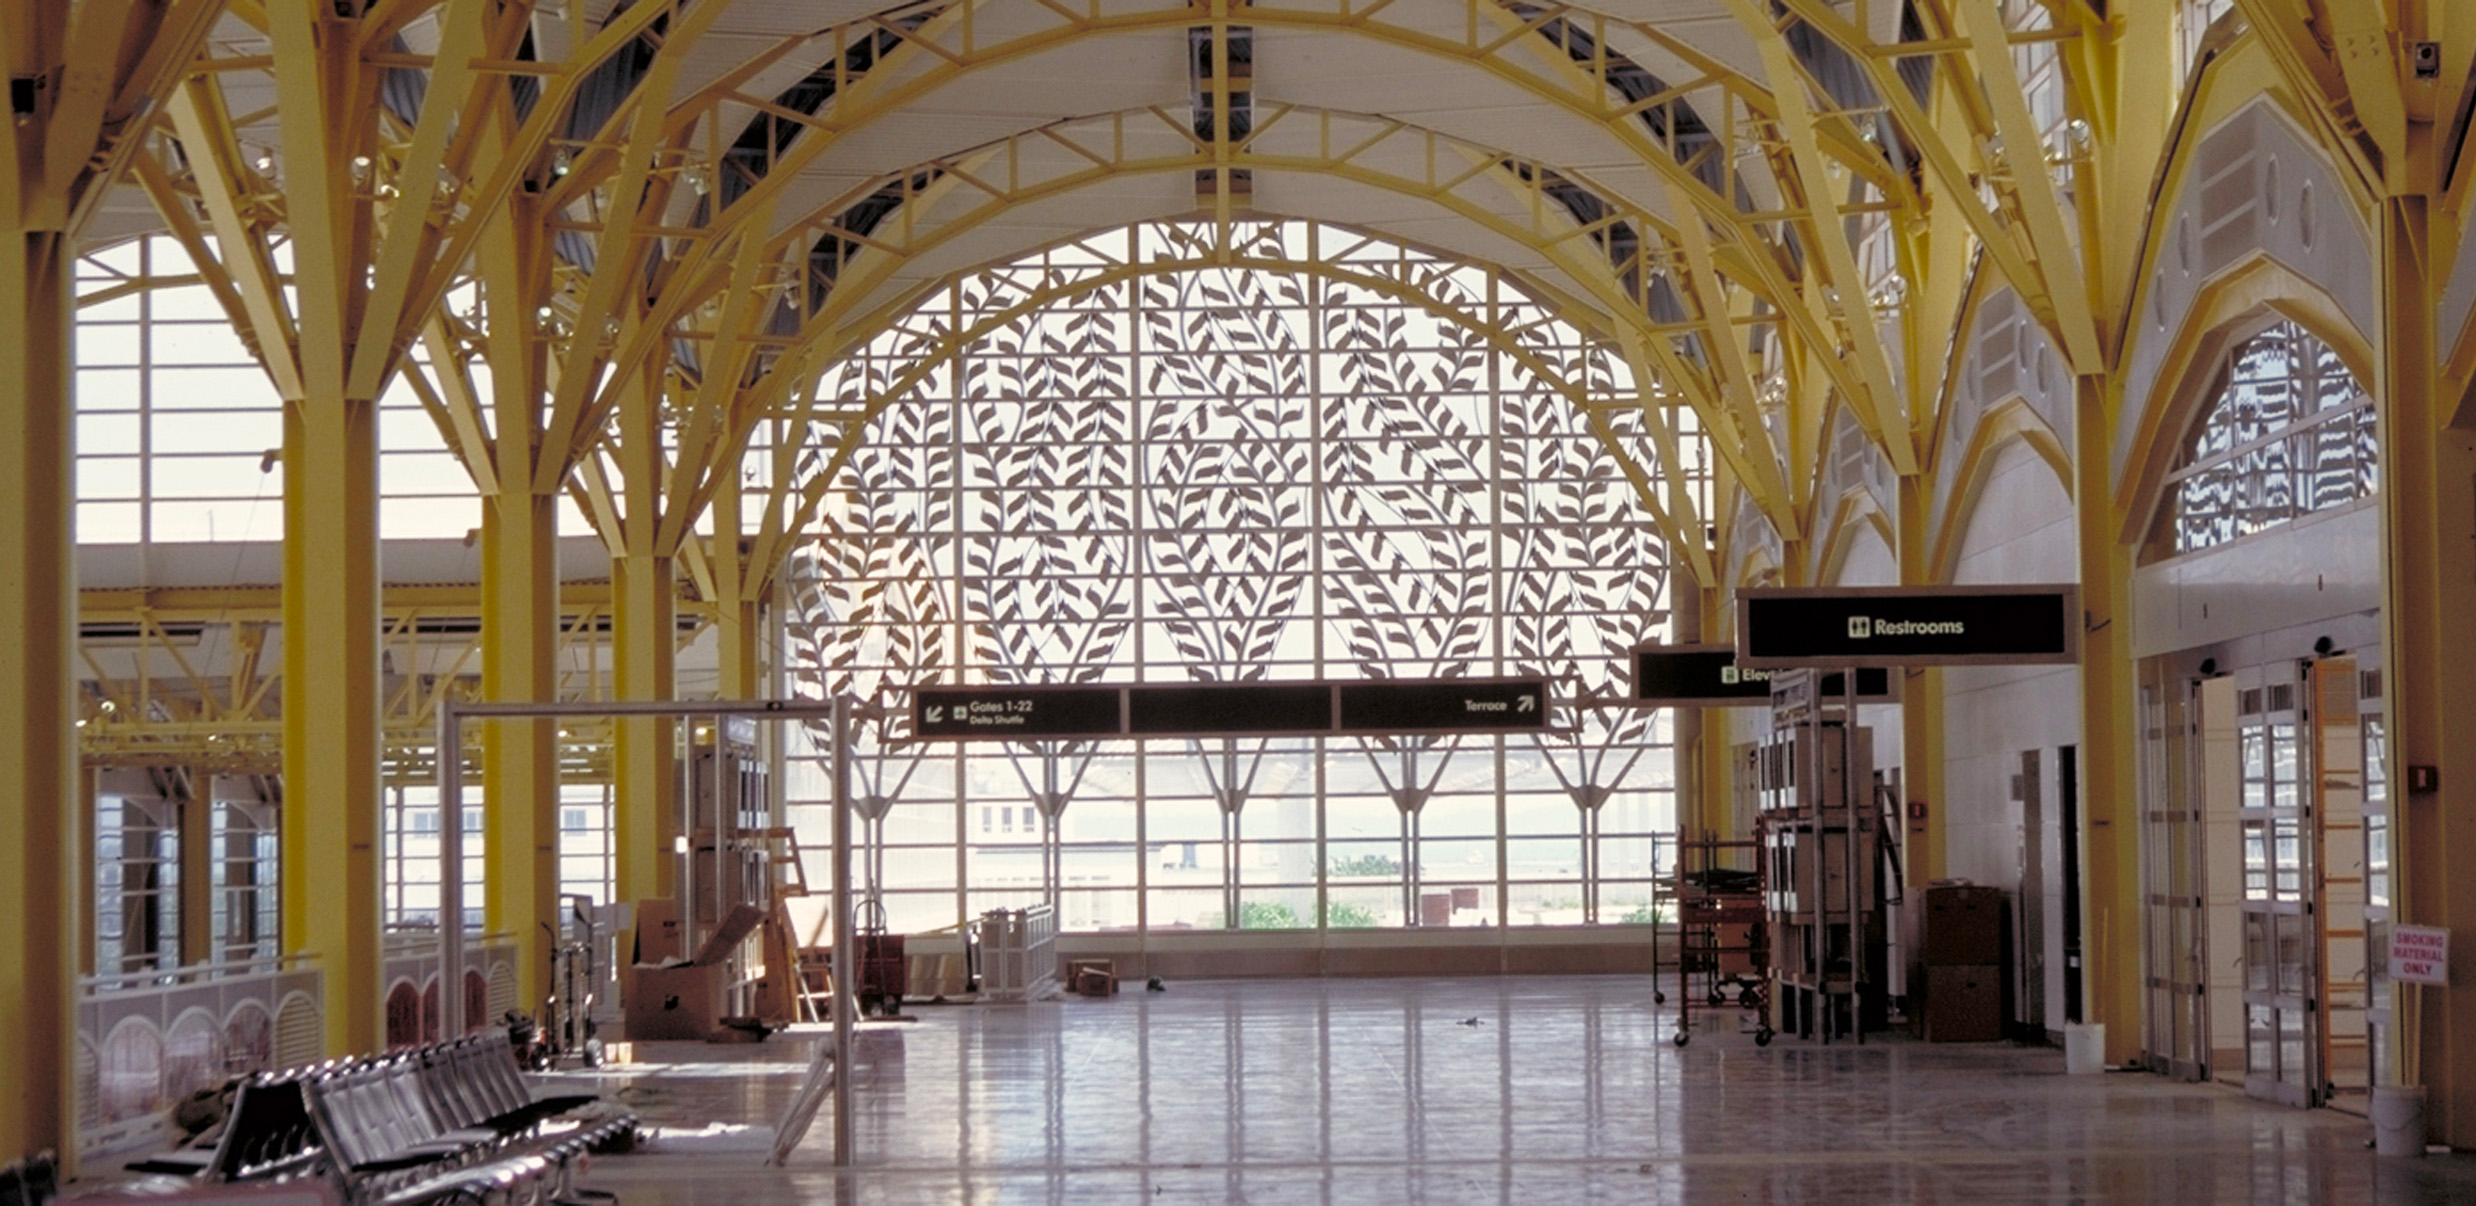 Ronald Reagan National Airport – Window Tracery